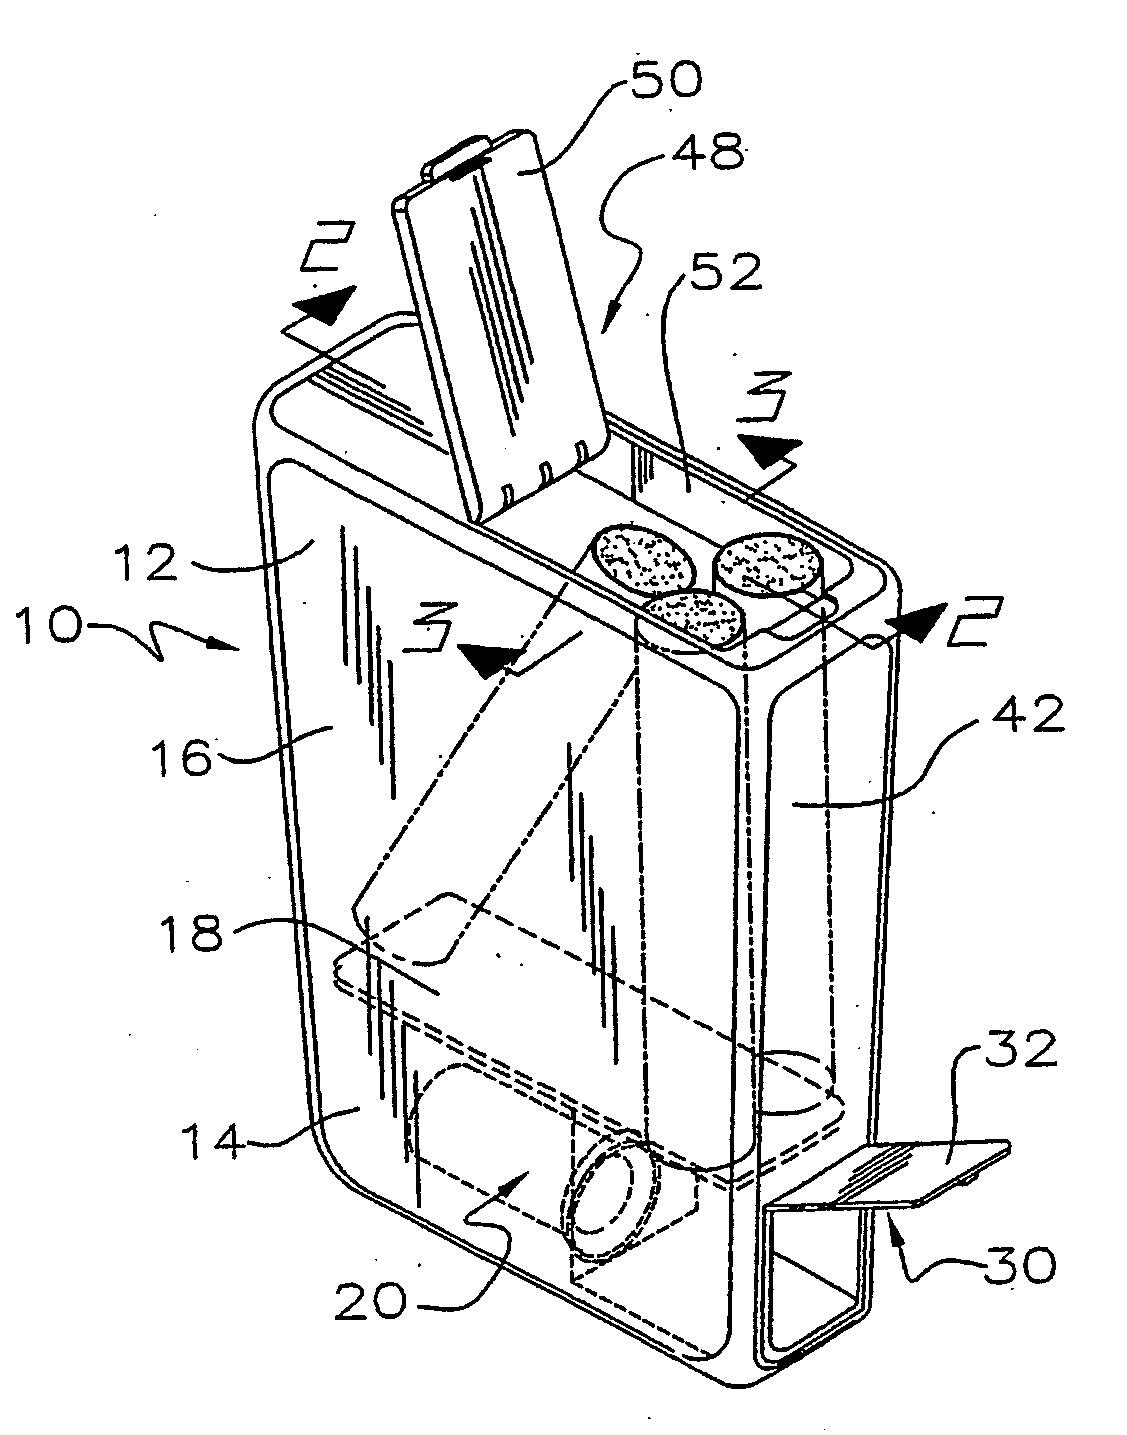 Compartmentalized cigarette snuffer and receptacle